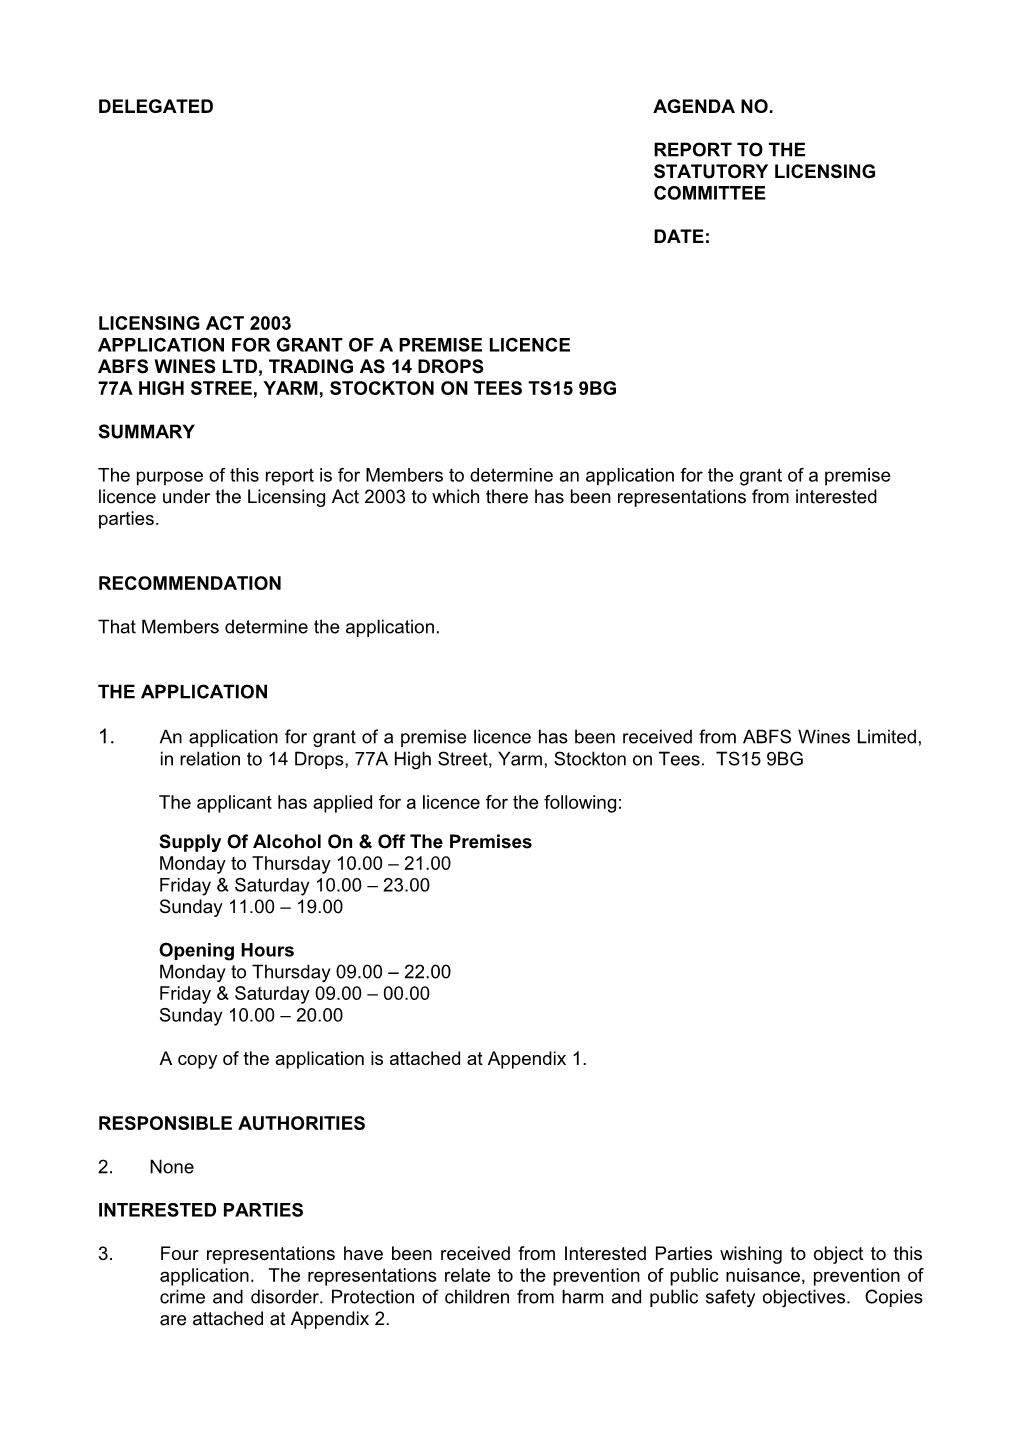 Report to the Statutory Licensing Committee